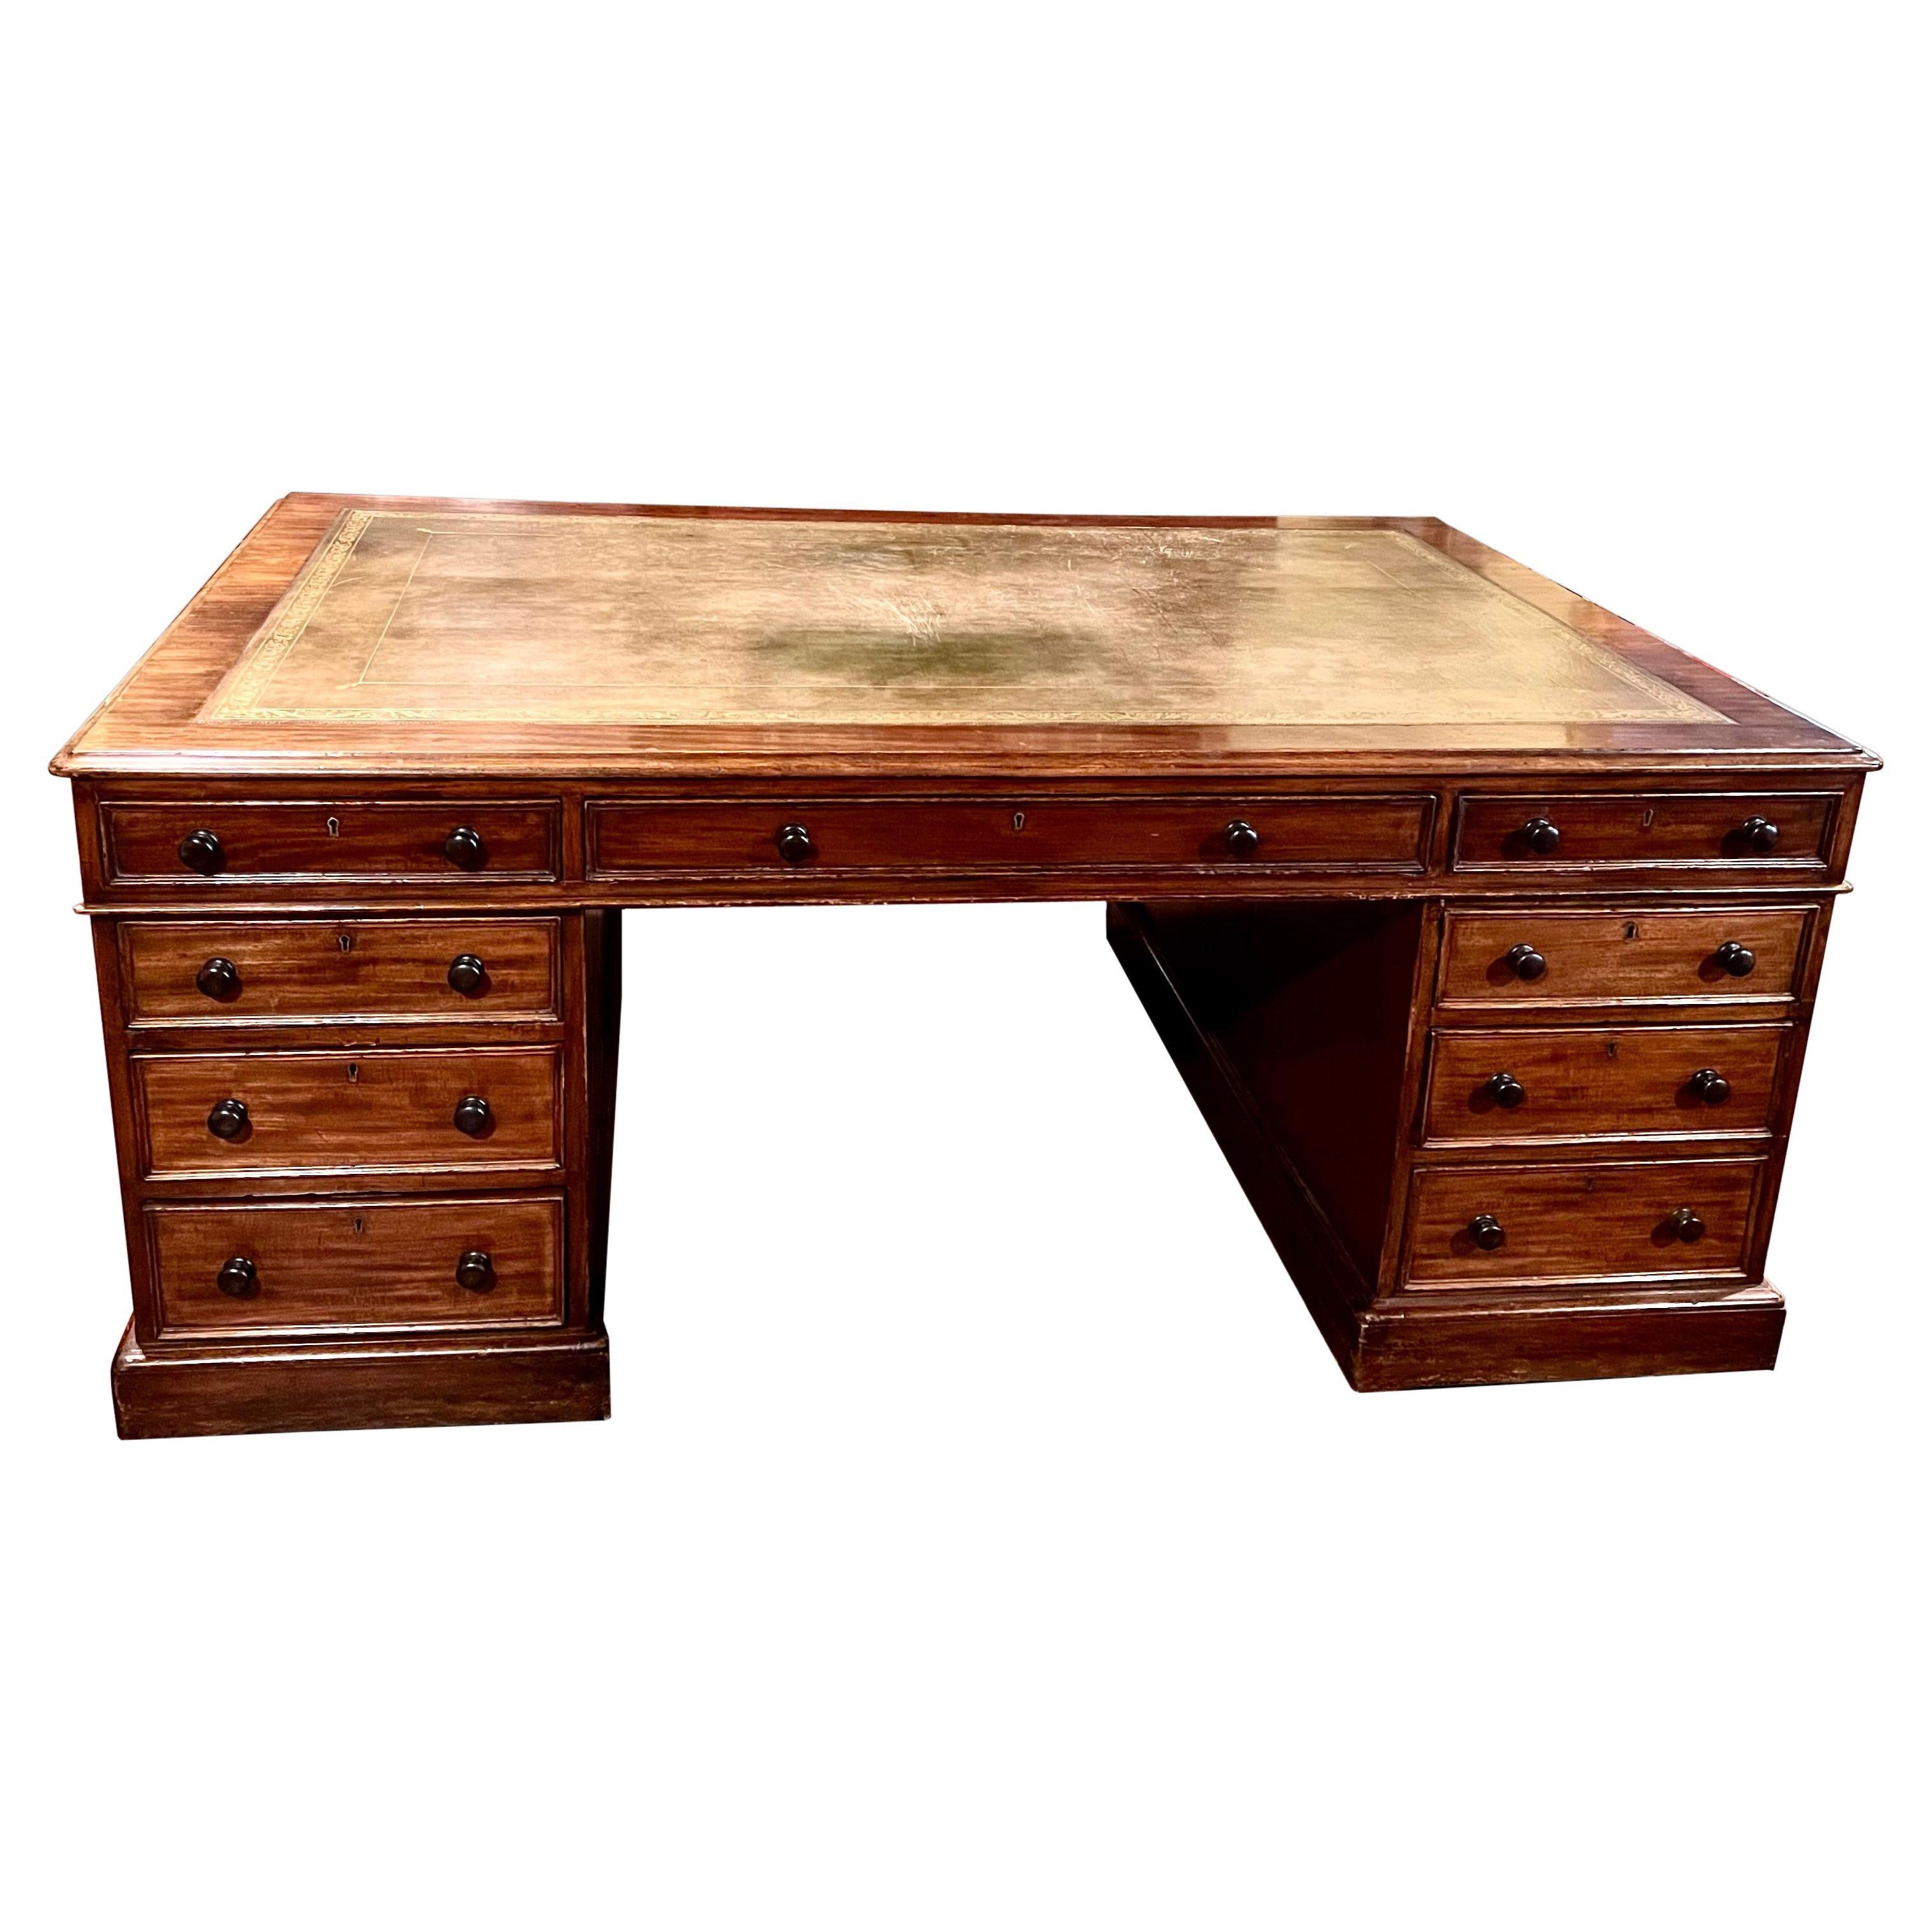 Large English Mahogany Partners Desk with Gilt-Tooled Brown Leather Top